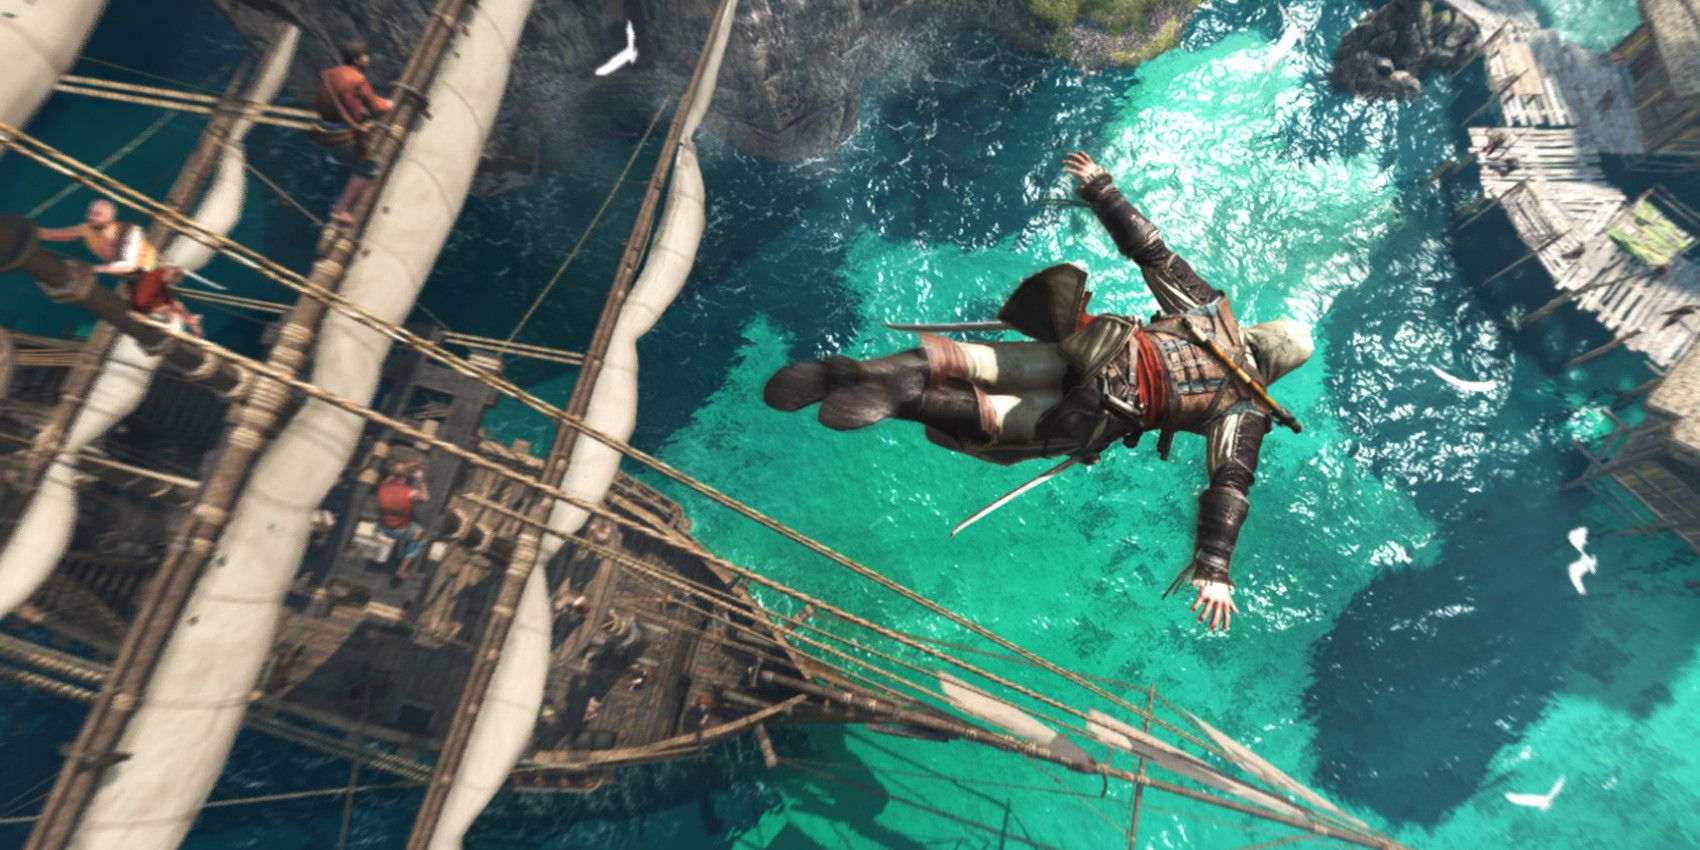 Edward dives from a ship into the ocean in Assassin's Creed Black Flag